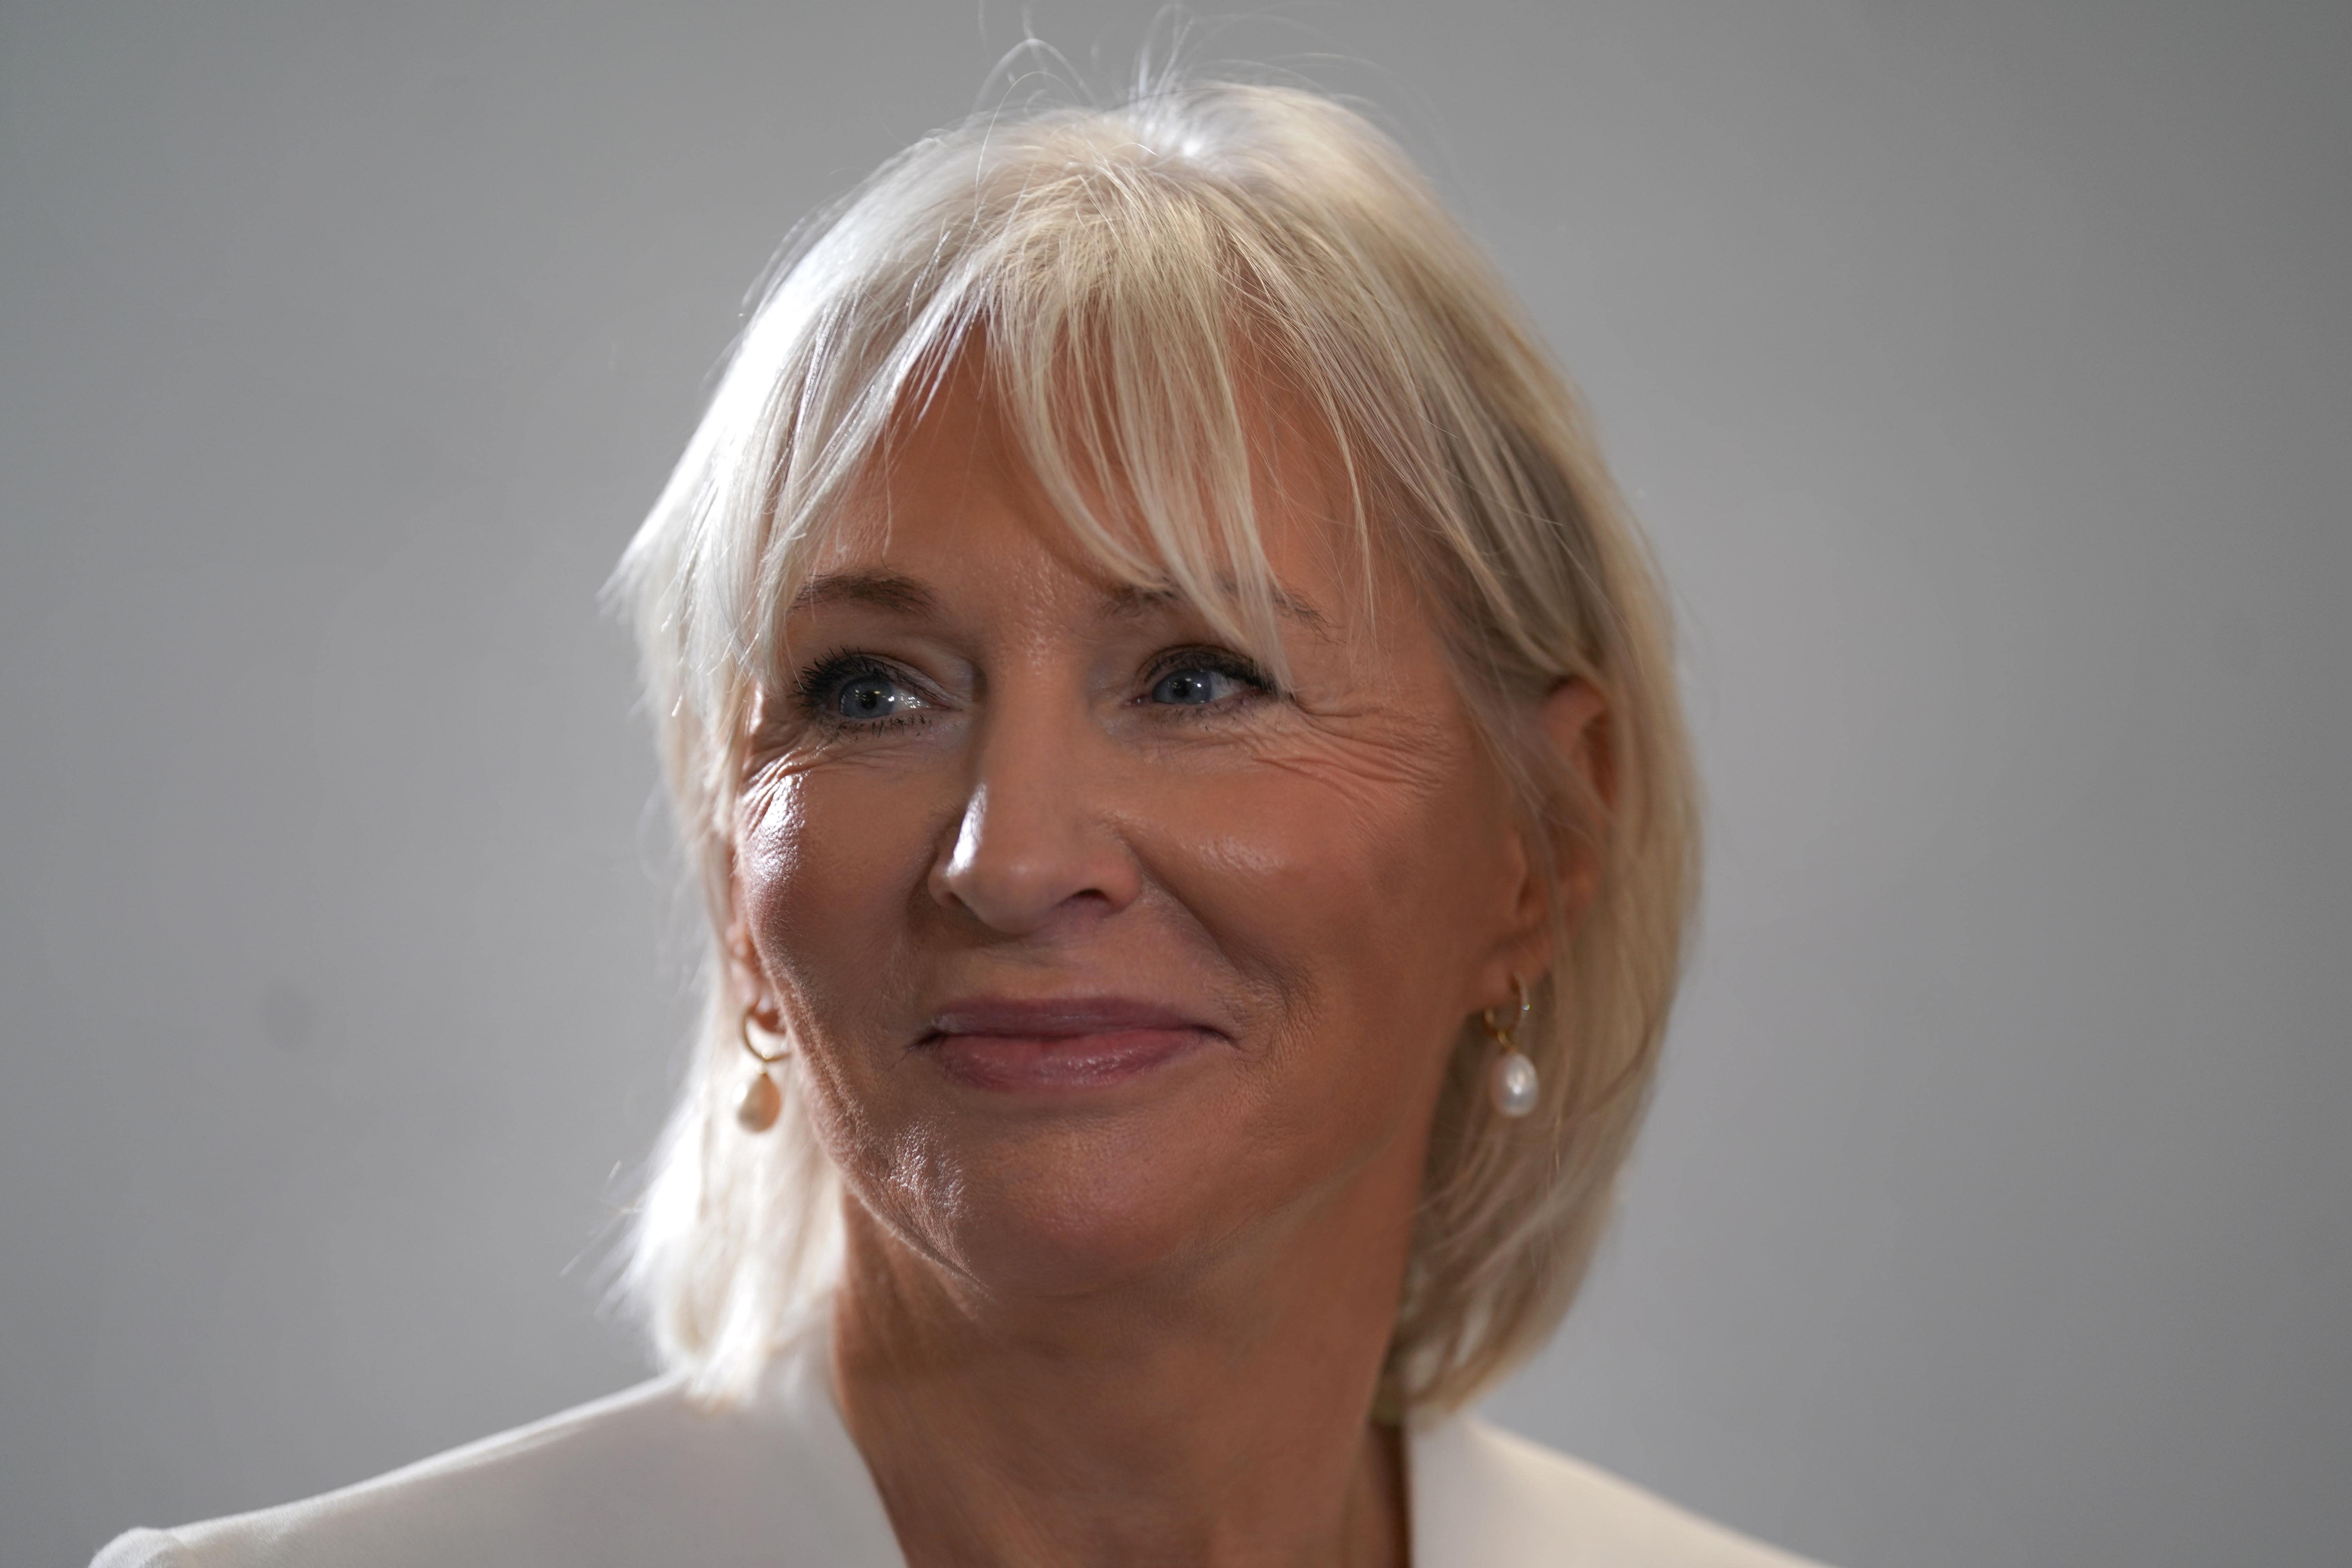 Nadine Dorries said she is quitting as an MP with immediate effect